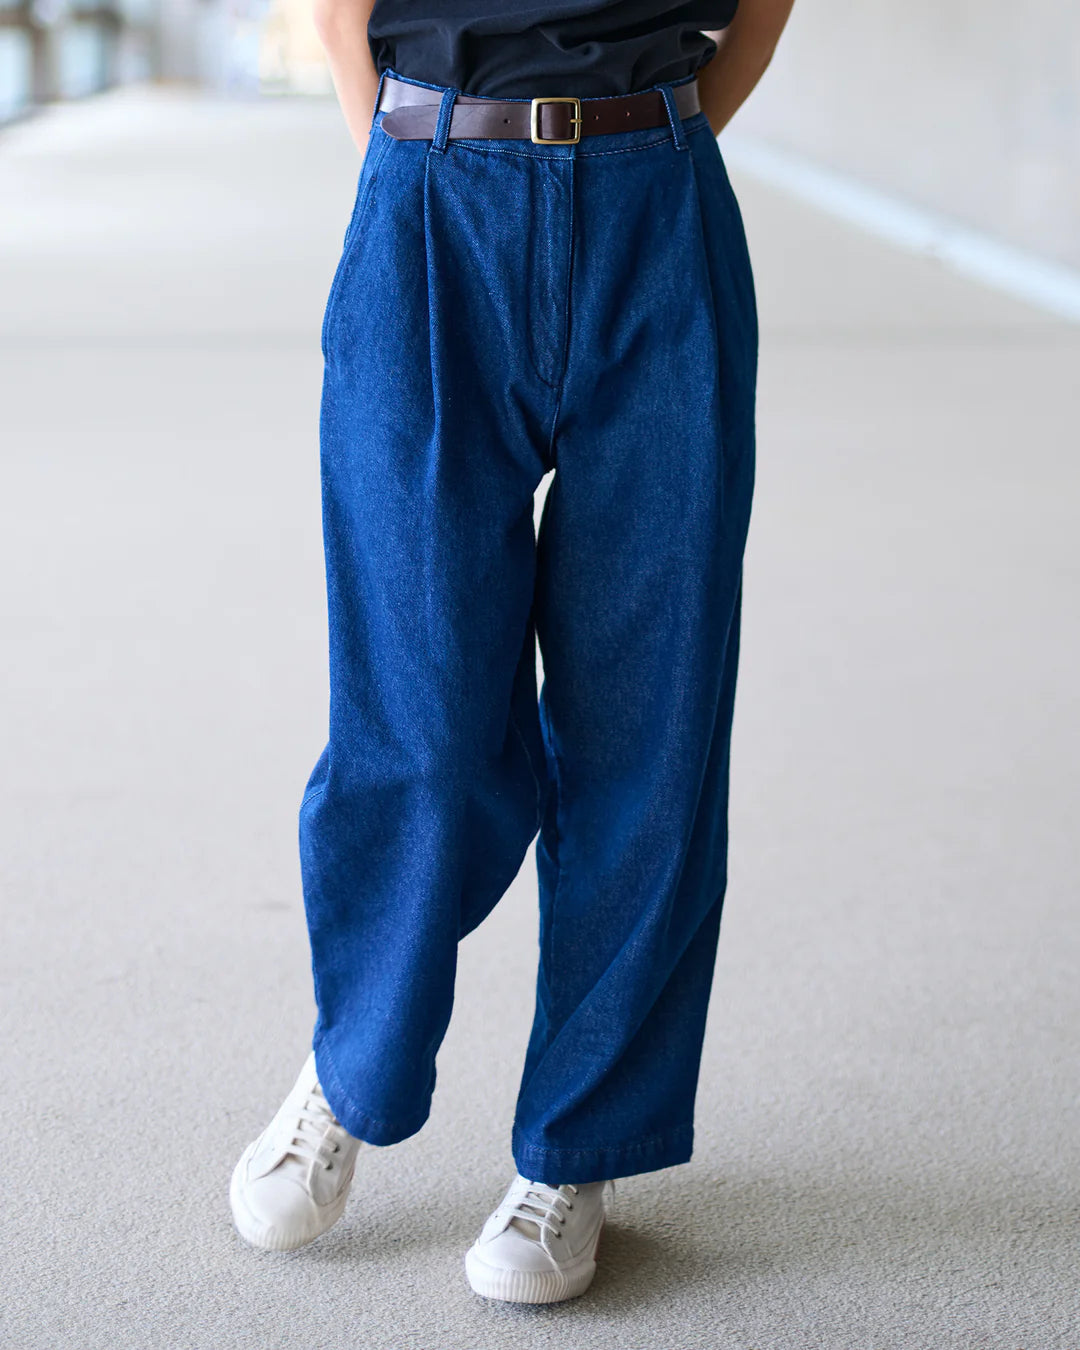 GIRLS OF DUST BRITISH WORKER PANT - 70S RECYCLED BLUE DENIM